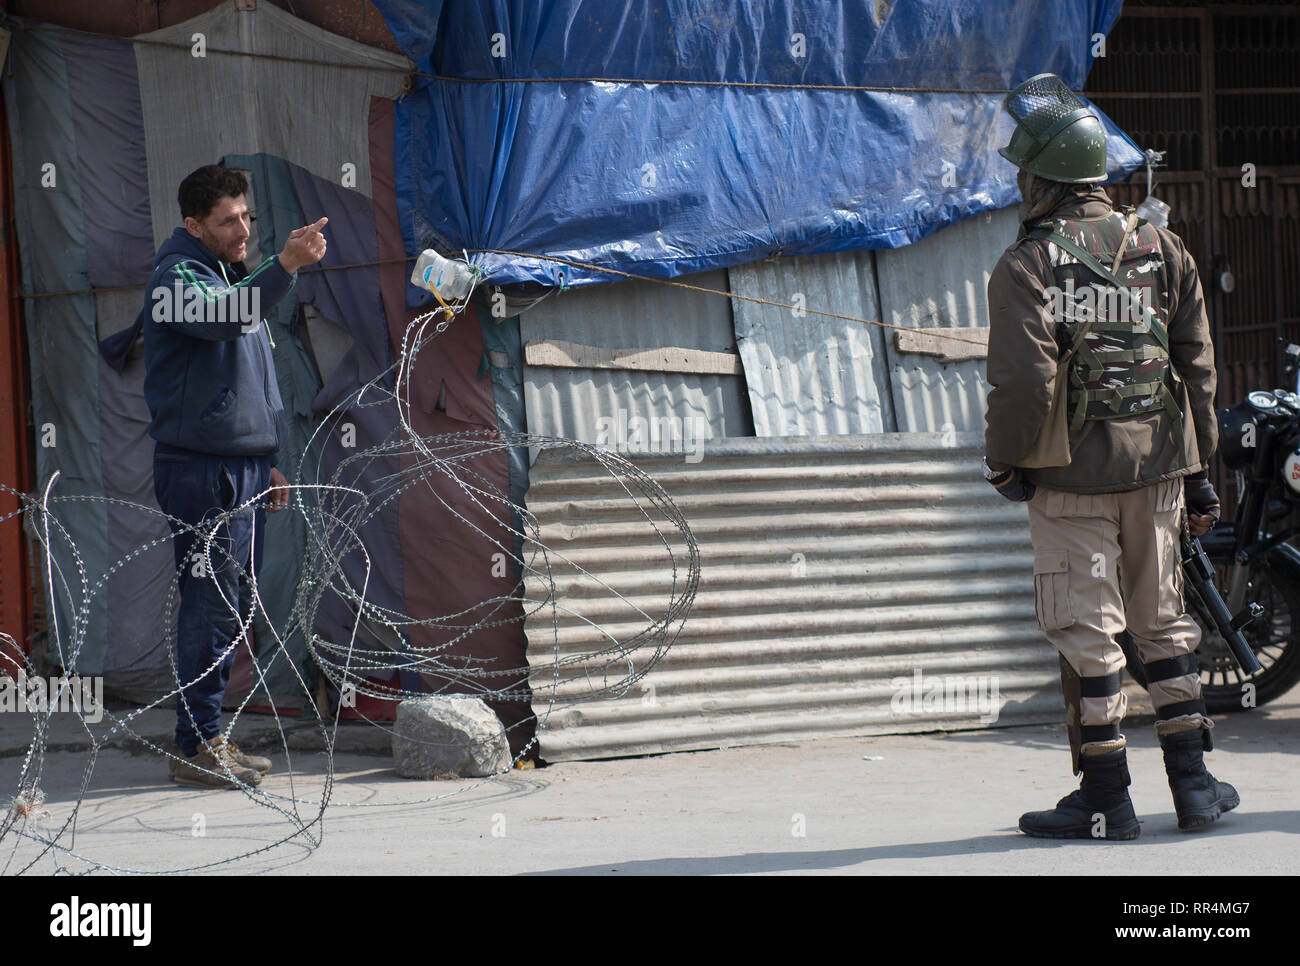 (190224) -- SRINAGAR, Feb. 24, 2019 (Xinhua) -- A Kashmiri man talks to an Indian paramilitary trooper during a security lockdown in downtown area of Srinagar, the summer capital of Indian-controlled Kashmir, Feb. 24, 2019. Indian-controlled Kashmir Sunday observed a shutdown to protest arrests of political activists and move of legally abrogating a law - Article 35 A of Indian constitution - that confers special status to the region. The strike call was given by the region's separatist groups under the leadership Joint Resistance Leadership (JRL) condemning arrests and fearing tampering with  Stock Photo